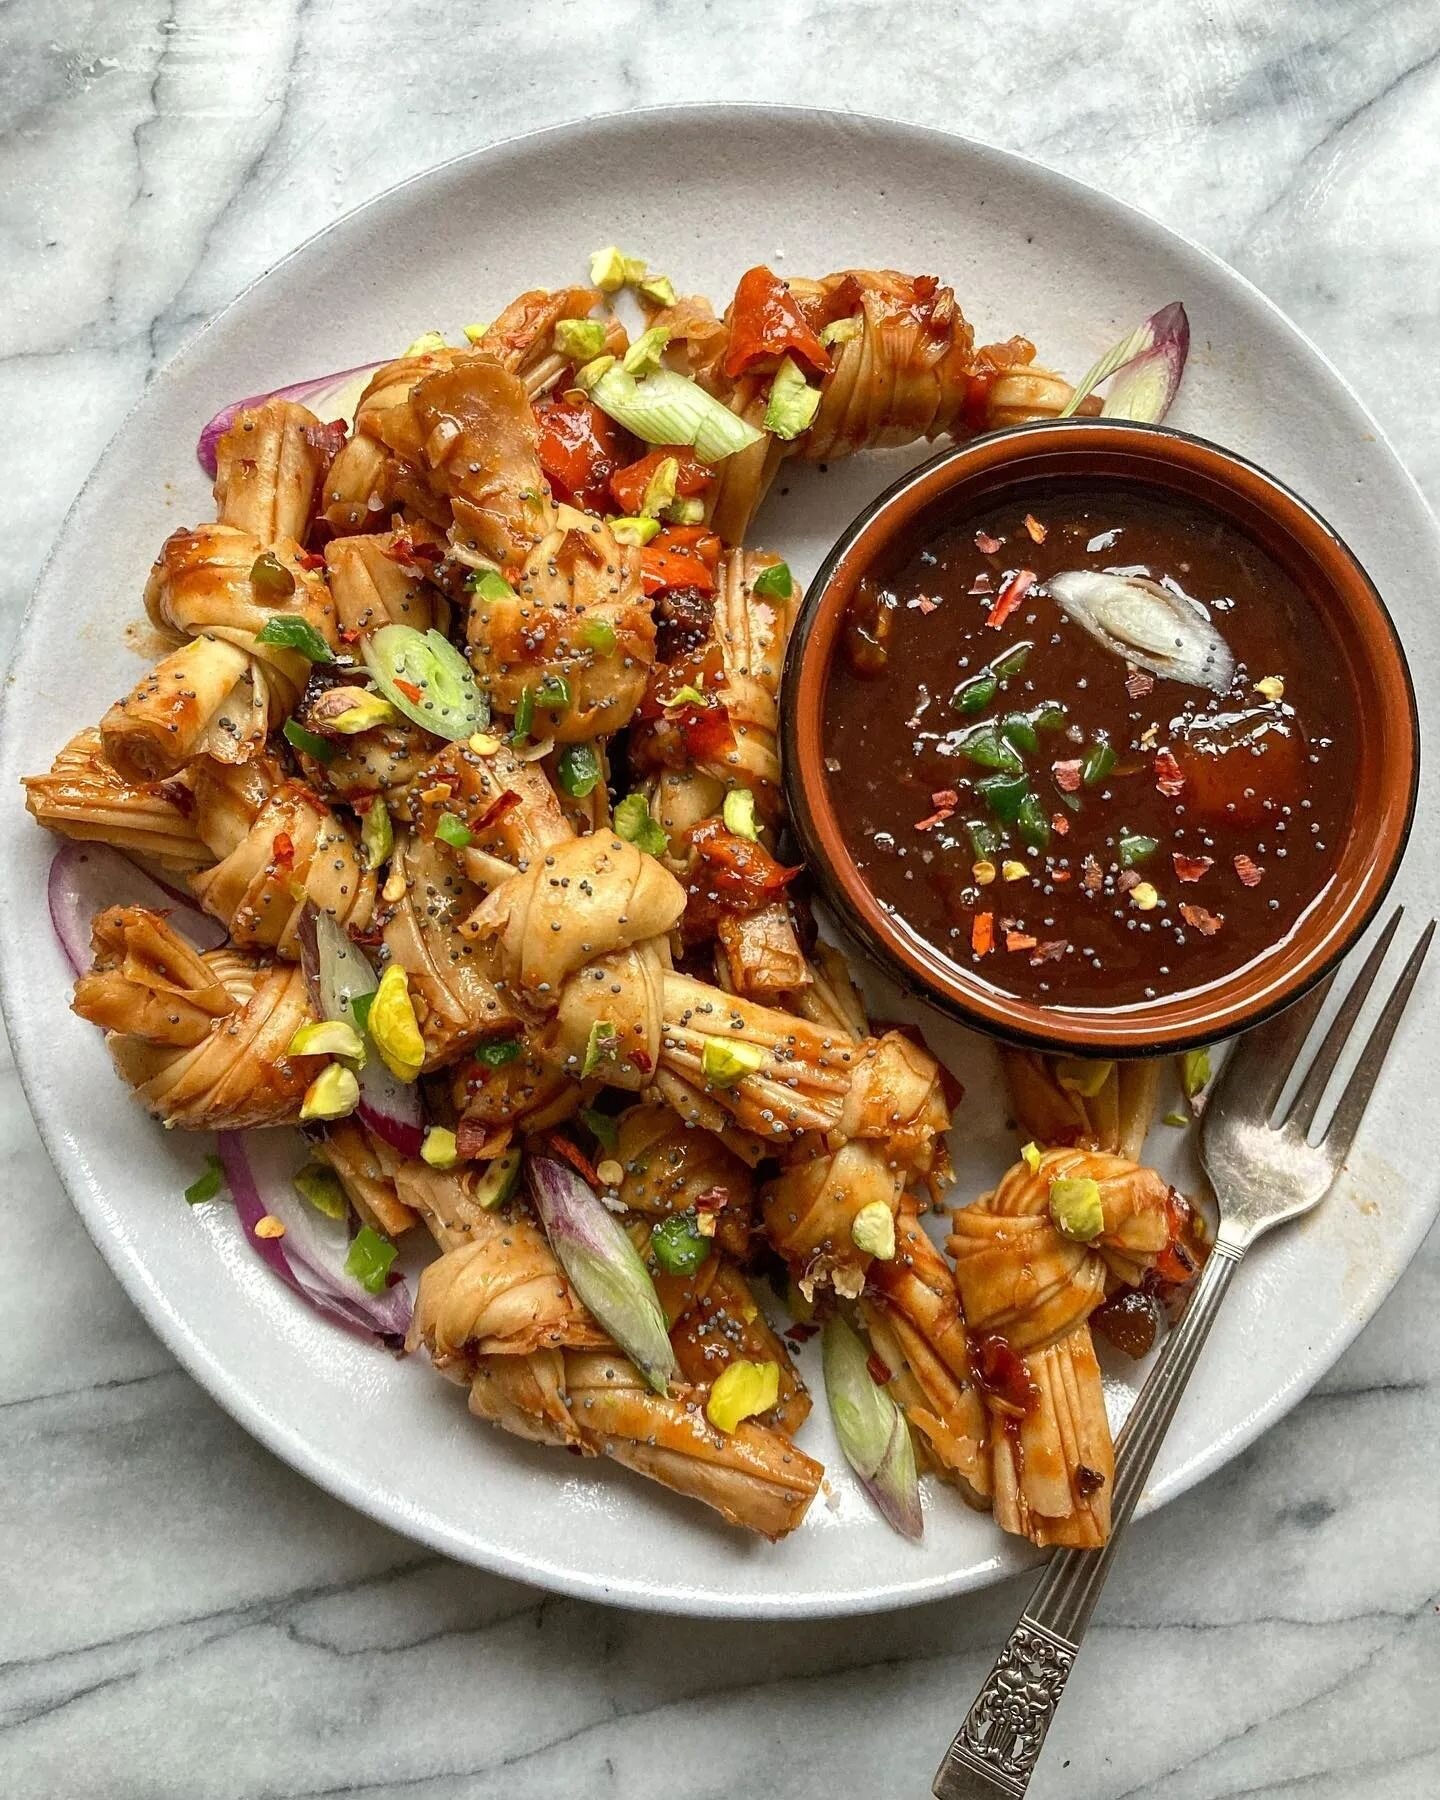 What an amazing recipe by @olliesfoodhive 🤩 Sweet Chilli Tofu Knots 🌶️😍⁠
⁠
Thanks so much for sharing, looks delicioussssss 😍😍 ⁠
⁠
💙 Tag us for your chance to be featured on our page!⁠
⁠
#tofutasty #regram #homemade #tofu #chilli #sweetchilli #